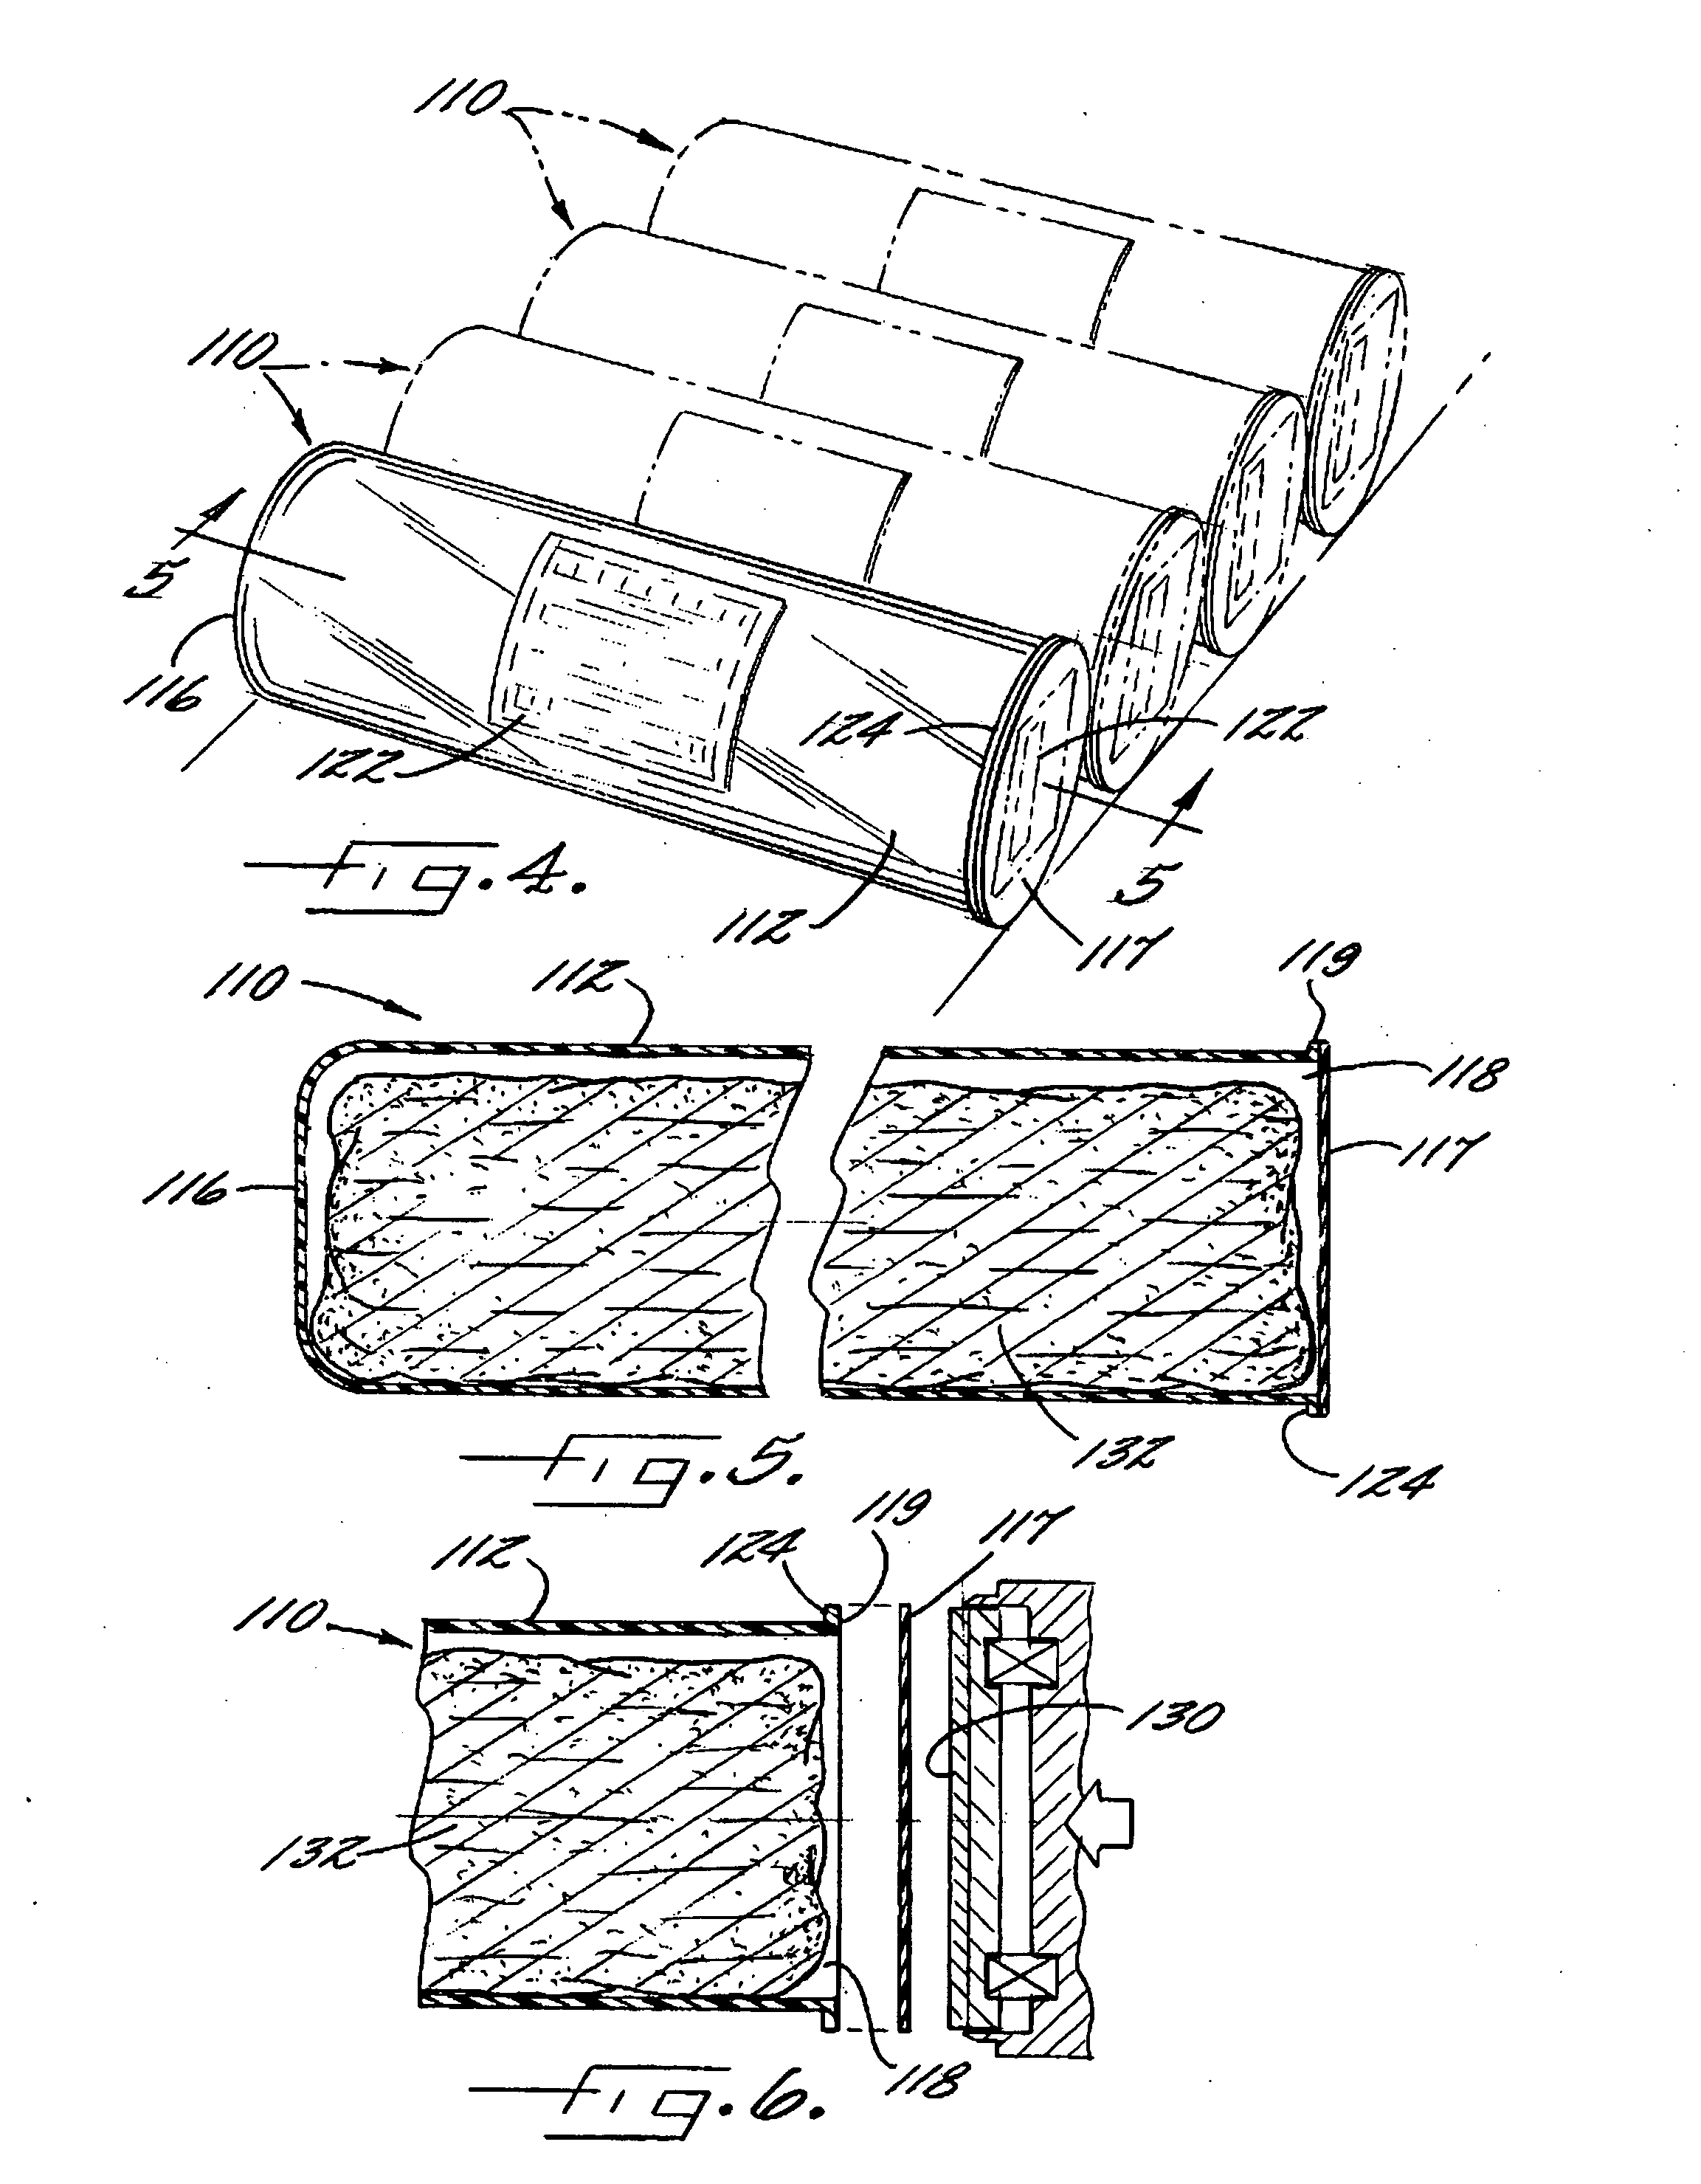 Container for packaging perishable food items